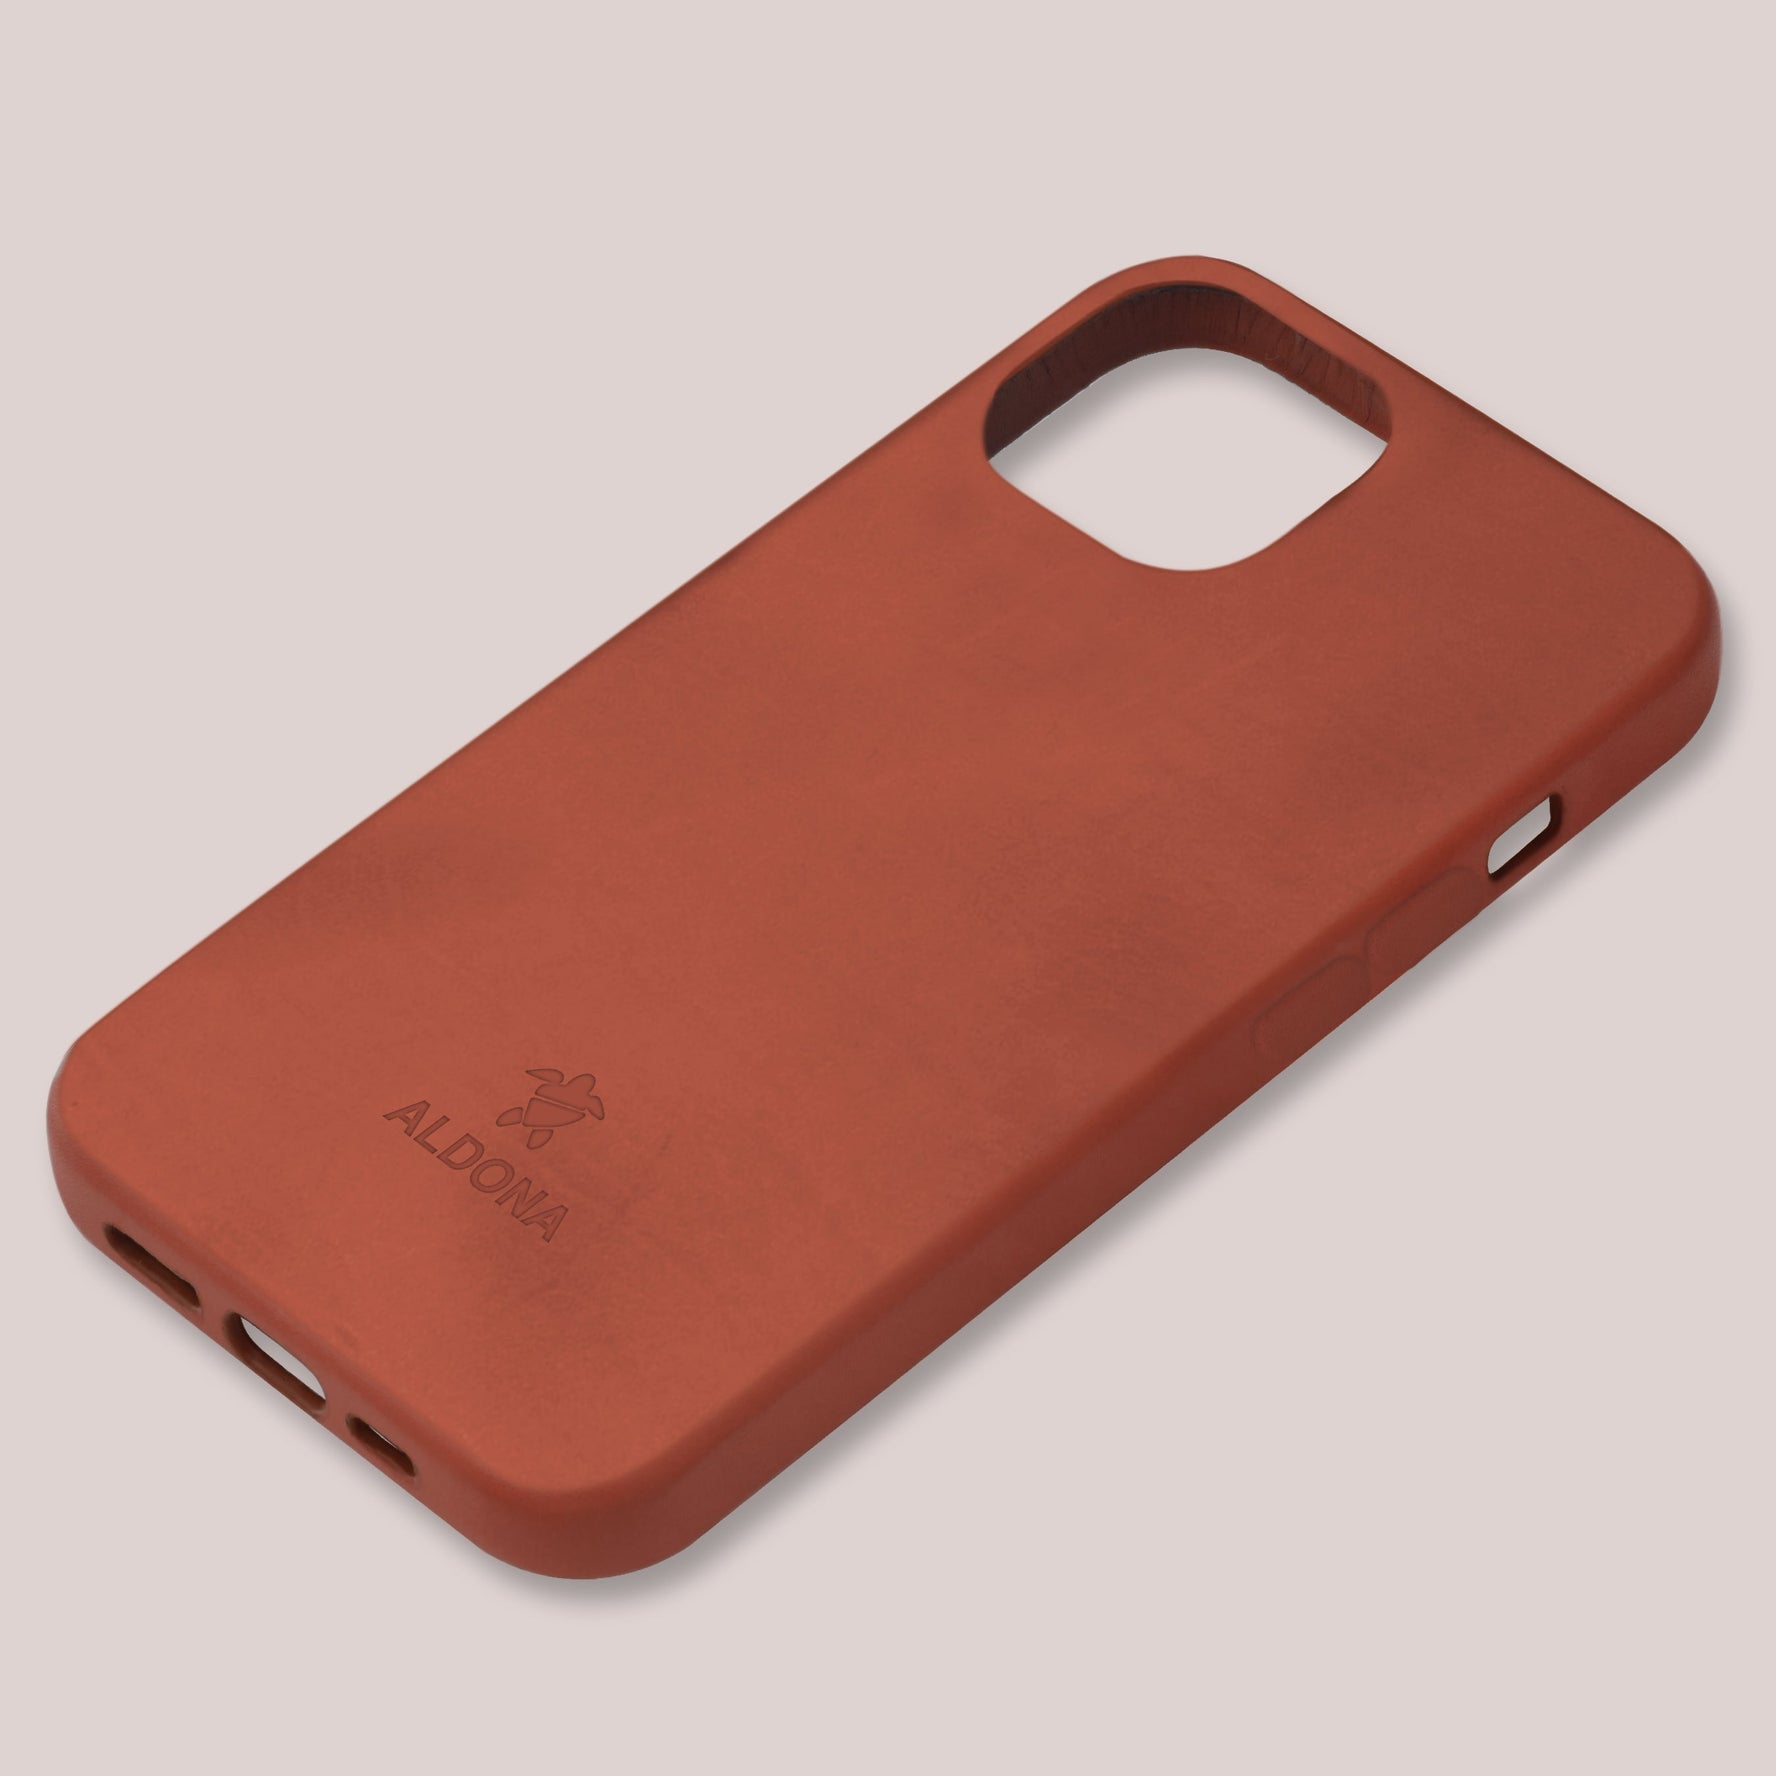 Kalon Case for iPhone 13 Pro Max with MagSafe Compatibility - Cognac